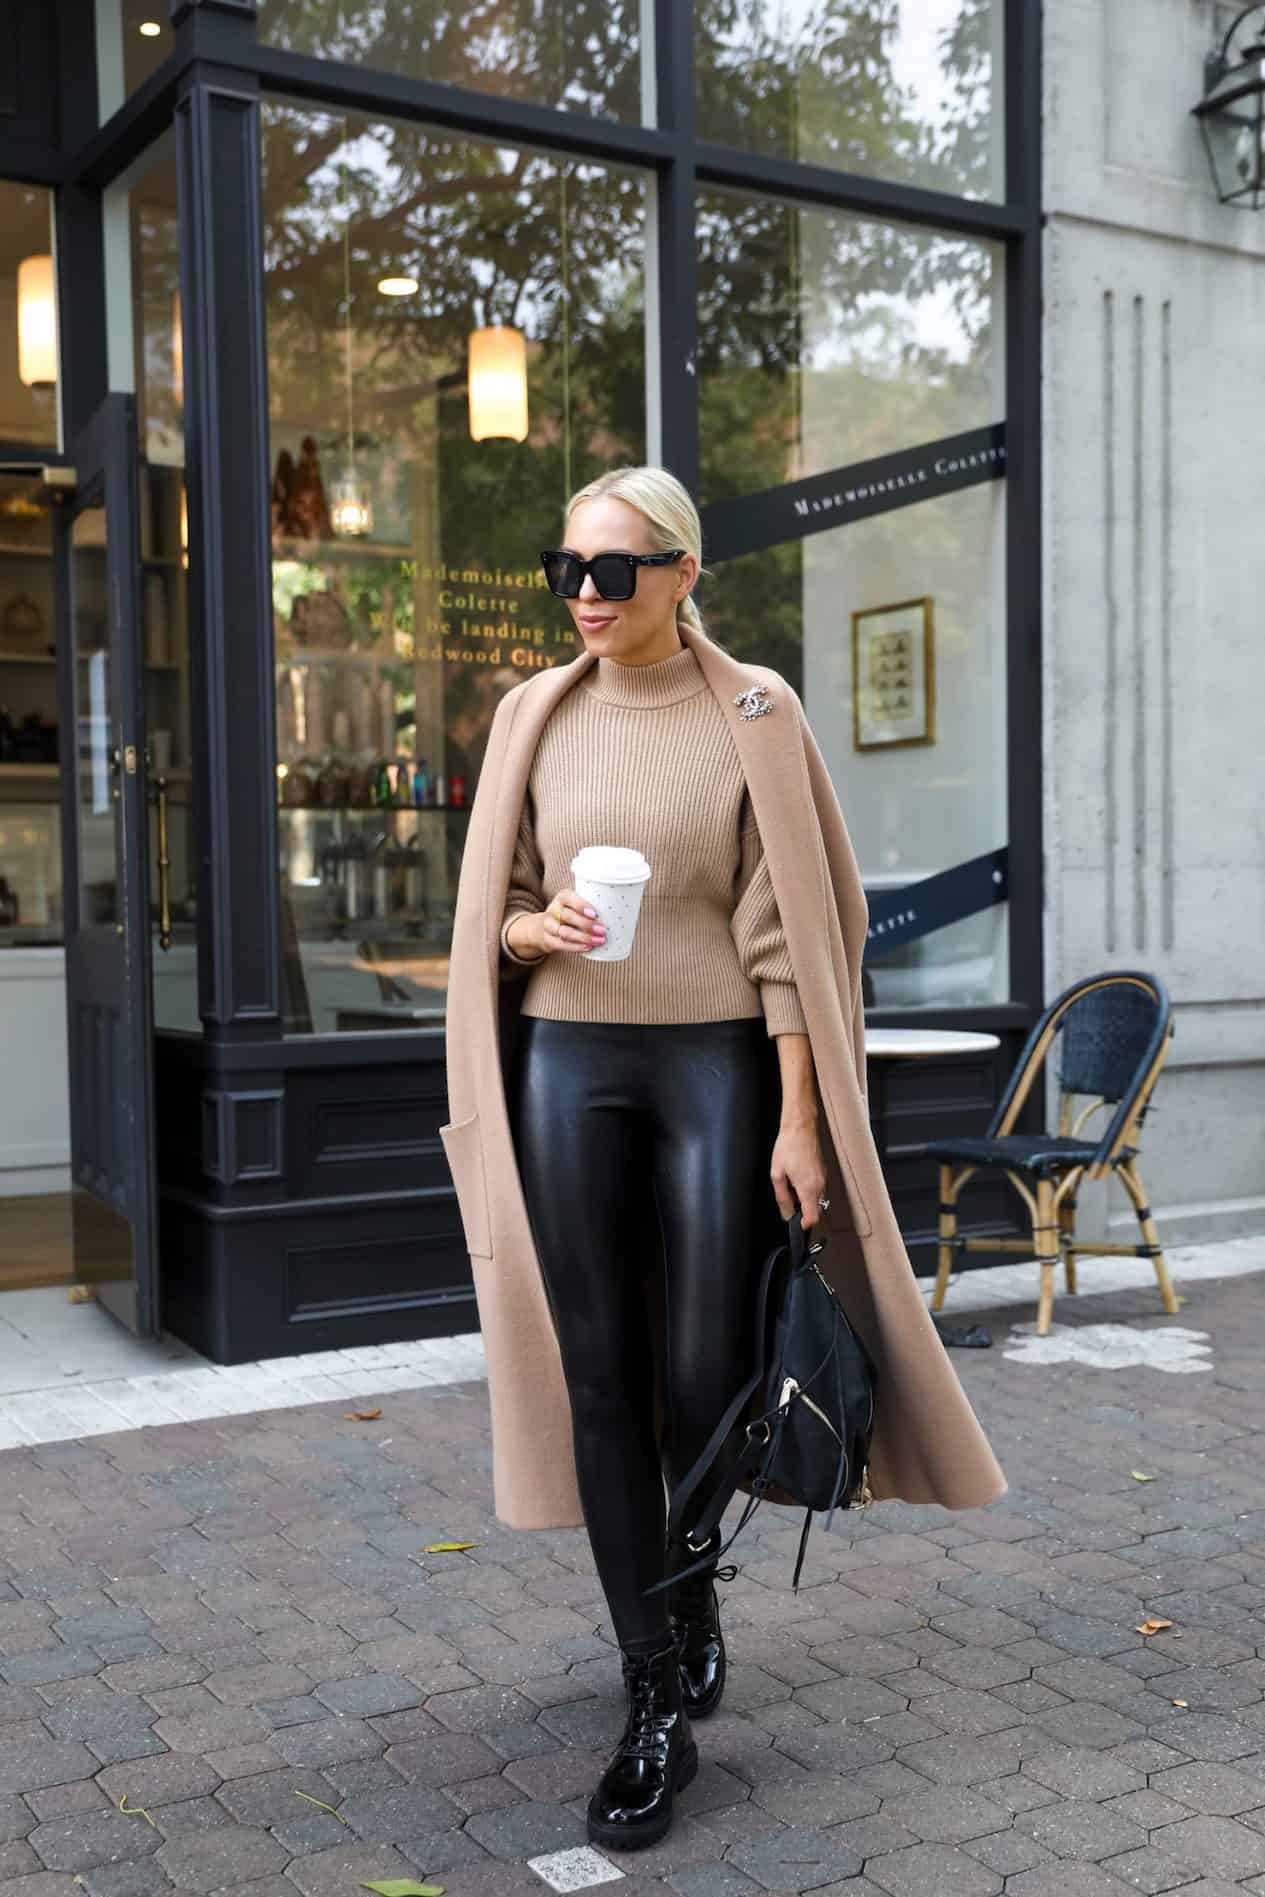 image of a woman wearing a camel wool coat, camel knit sweater, and black leather leggings with combat boots